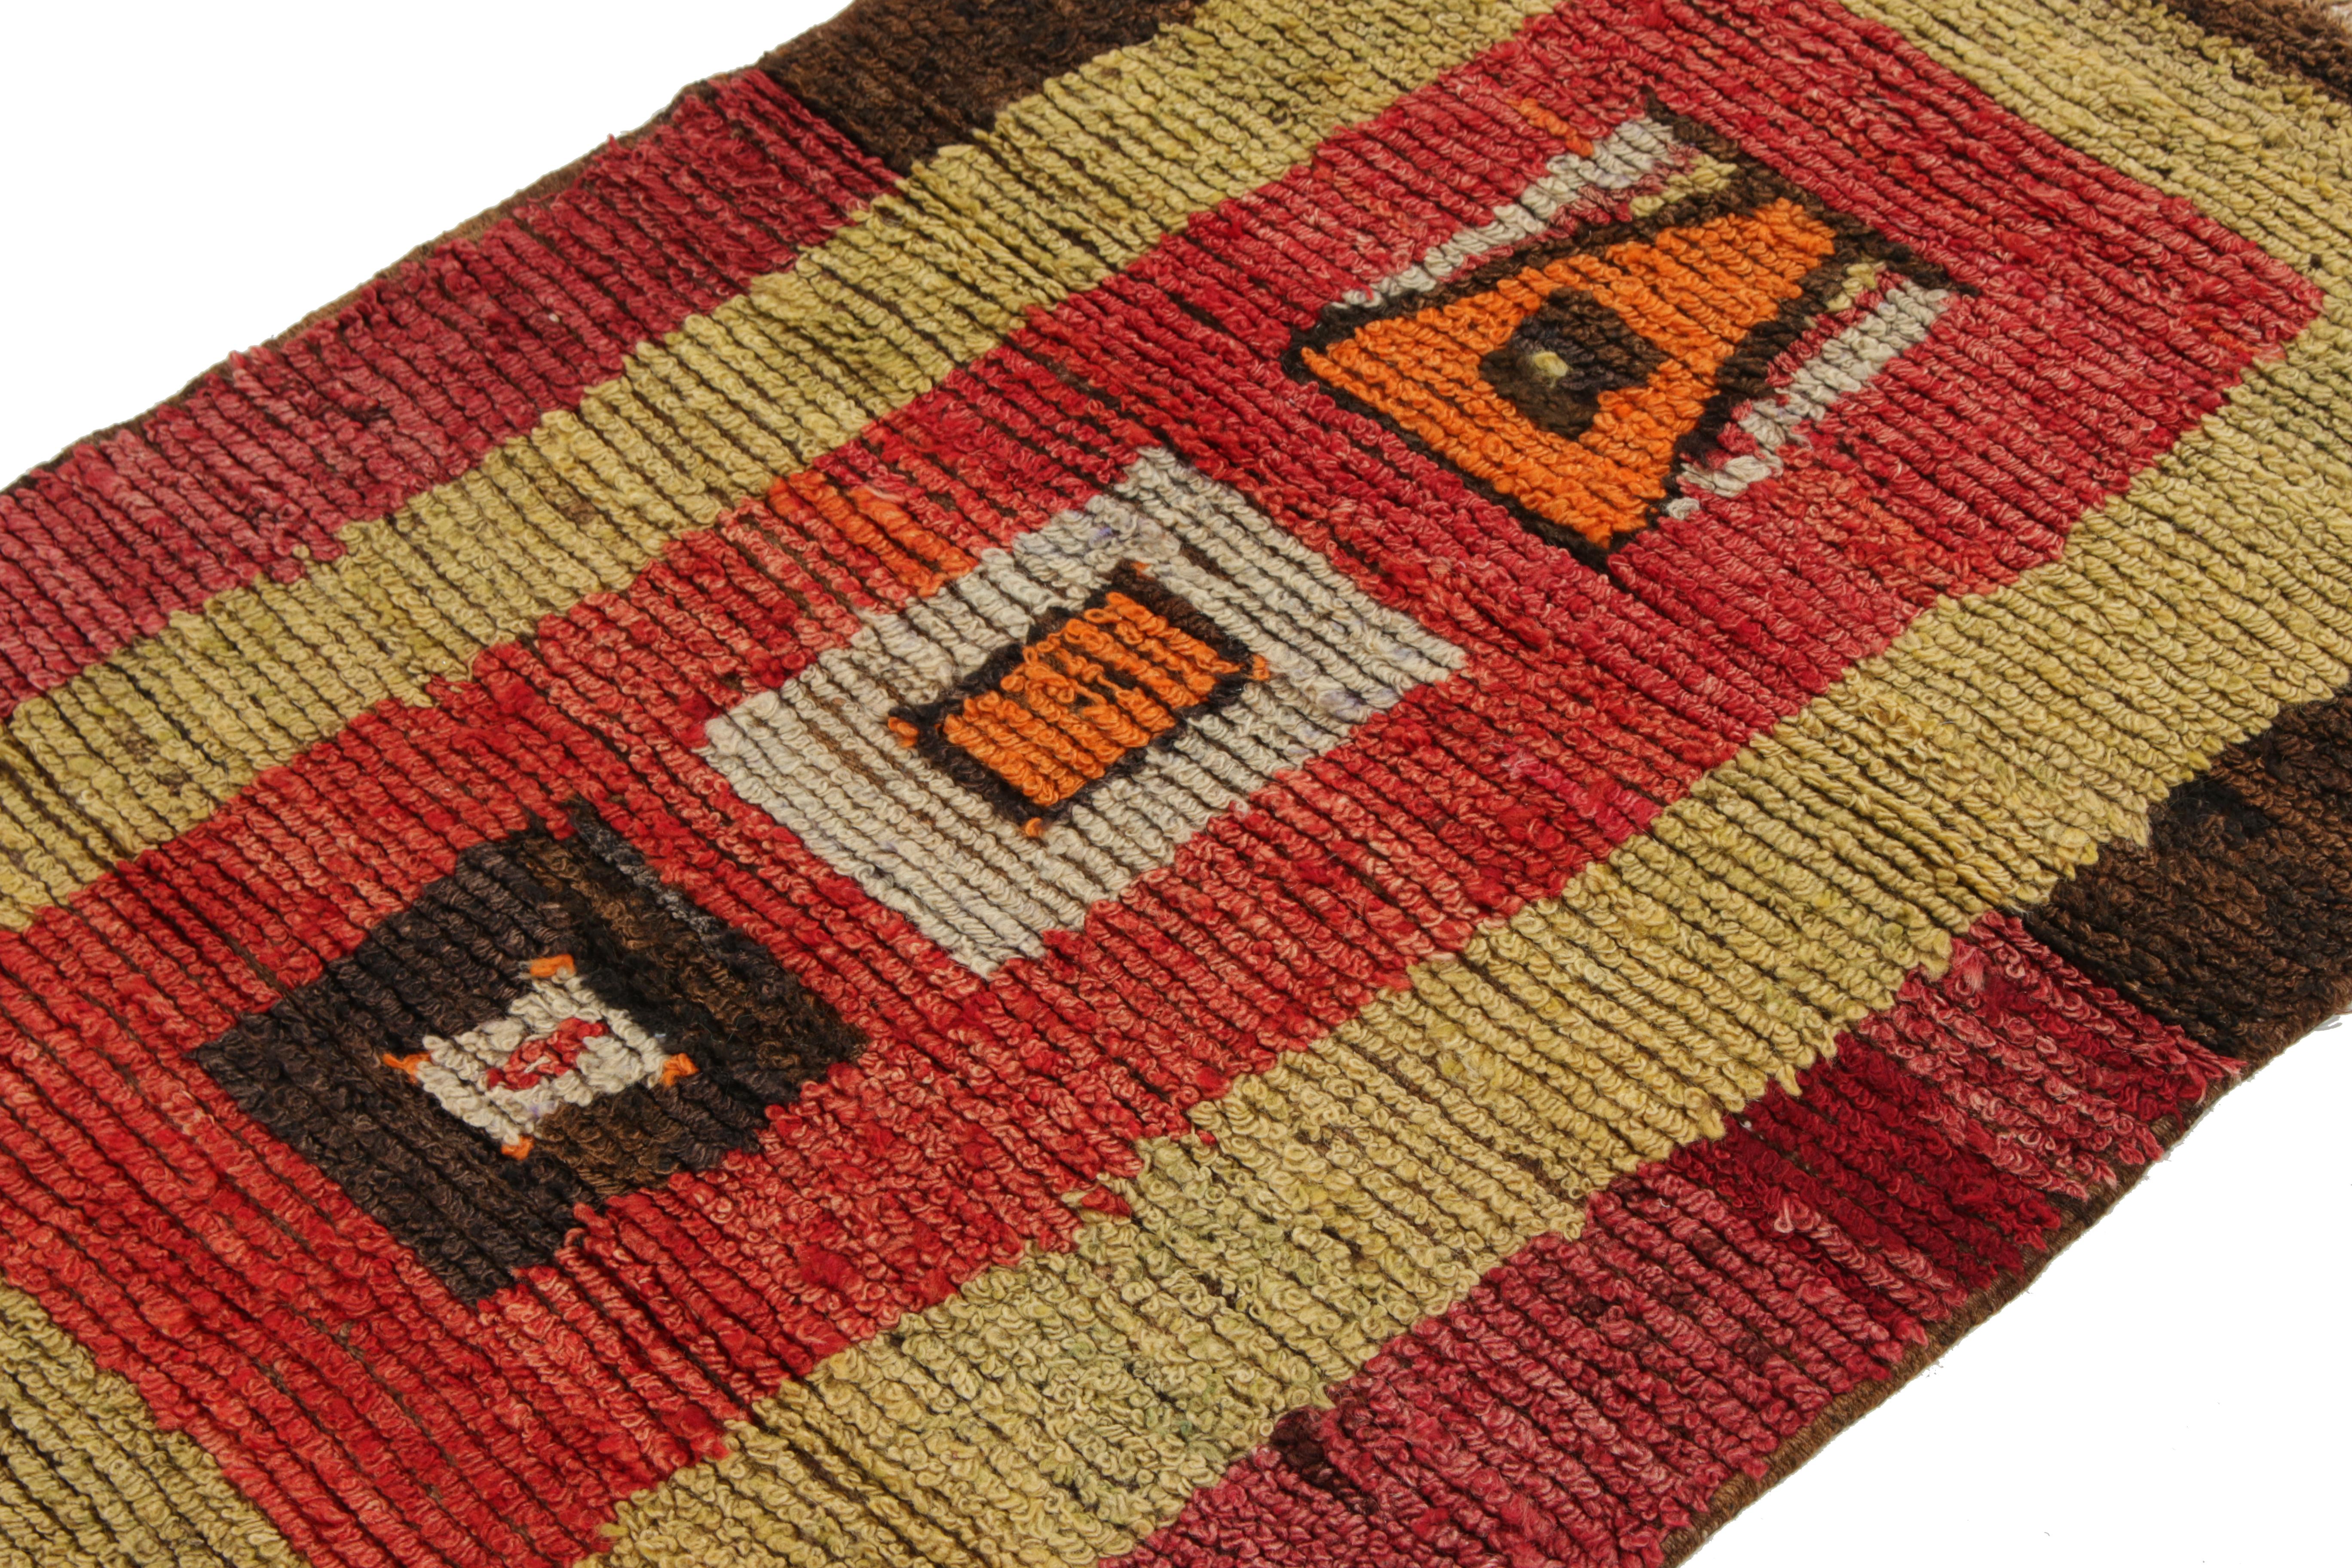 Turkish 1950s Vintage Tulu Rug in Red, Yellow, Brown Geometric Pattern by Rug & Kilim For Sale